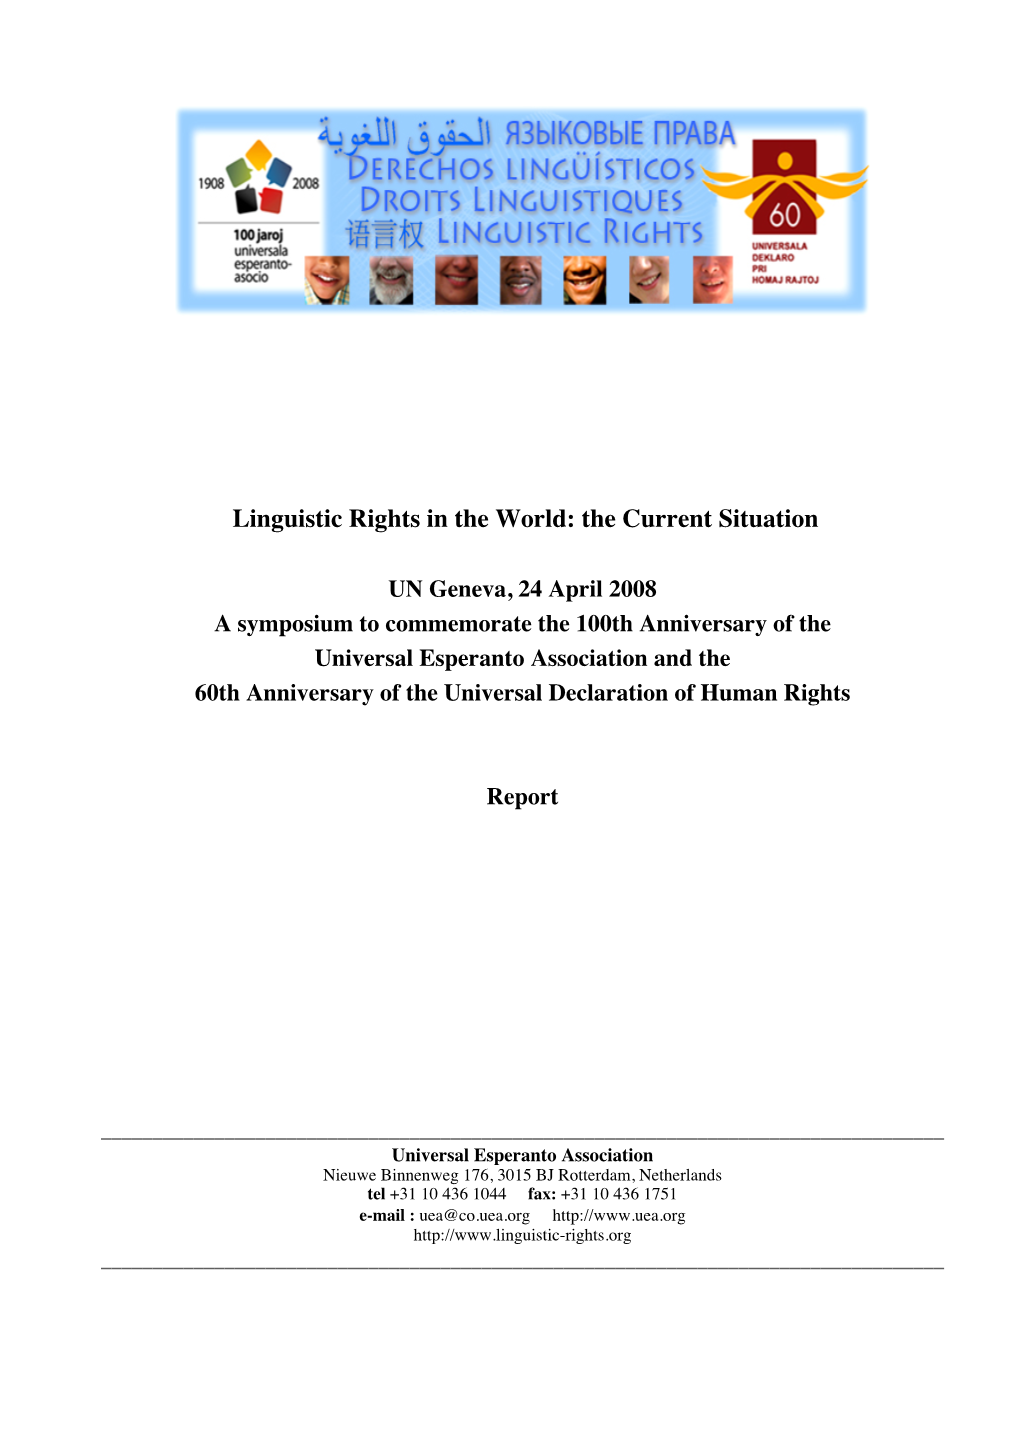 Linguistic Rights in the World: the Current Situation